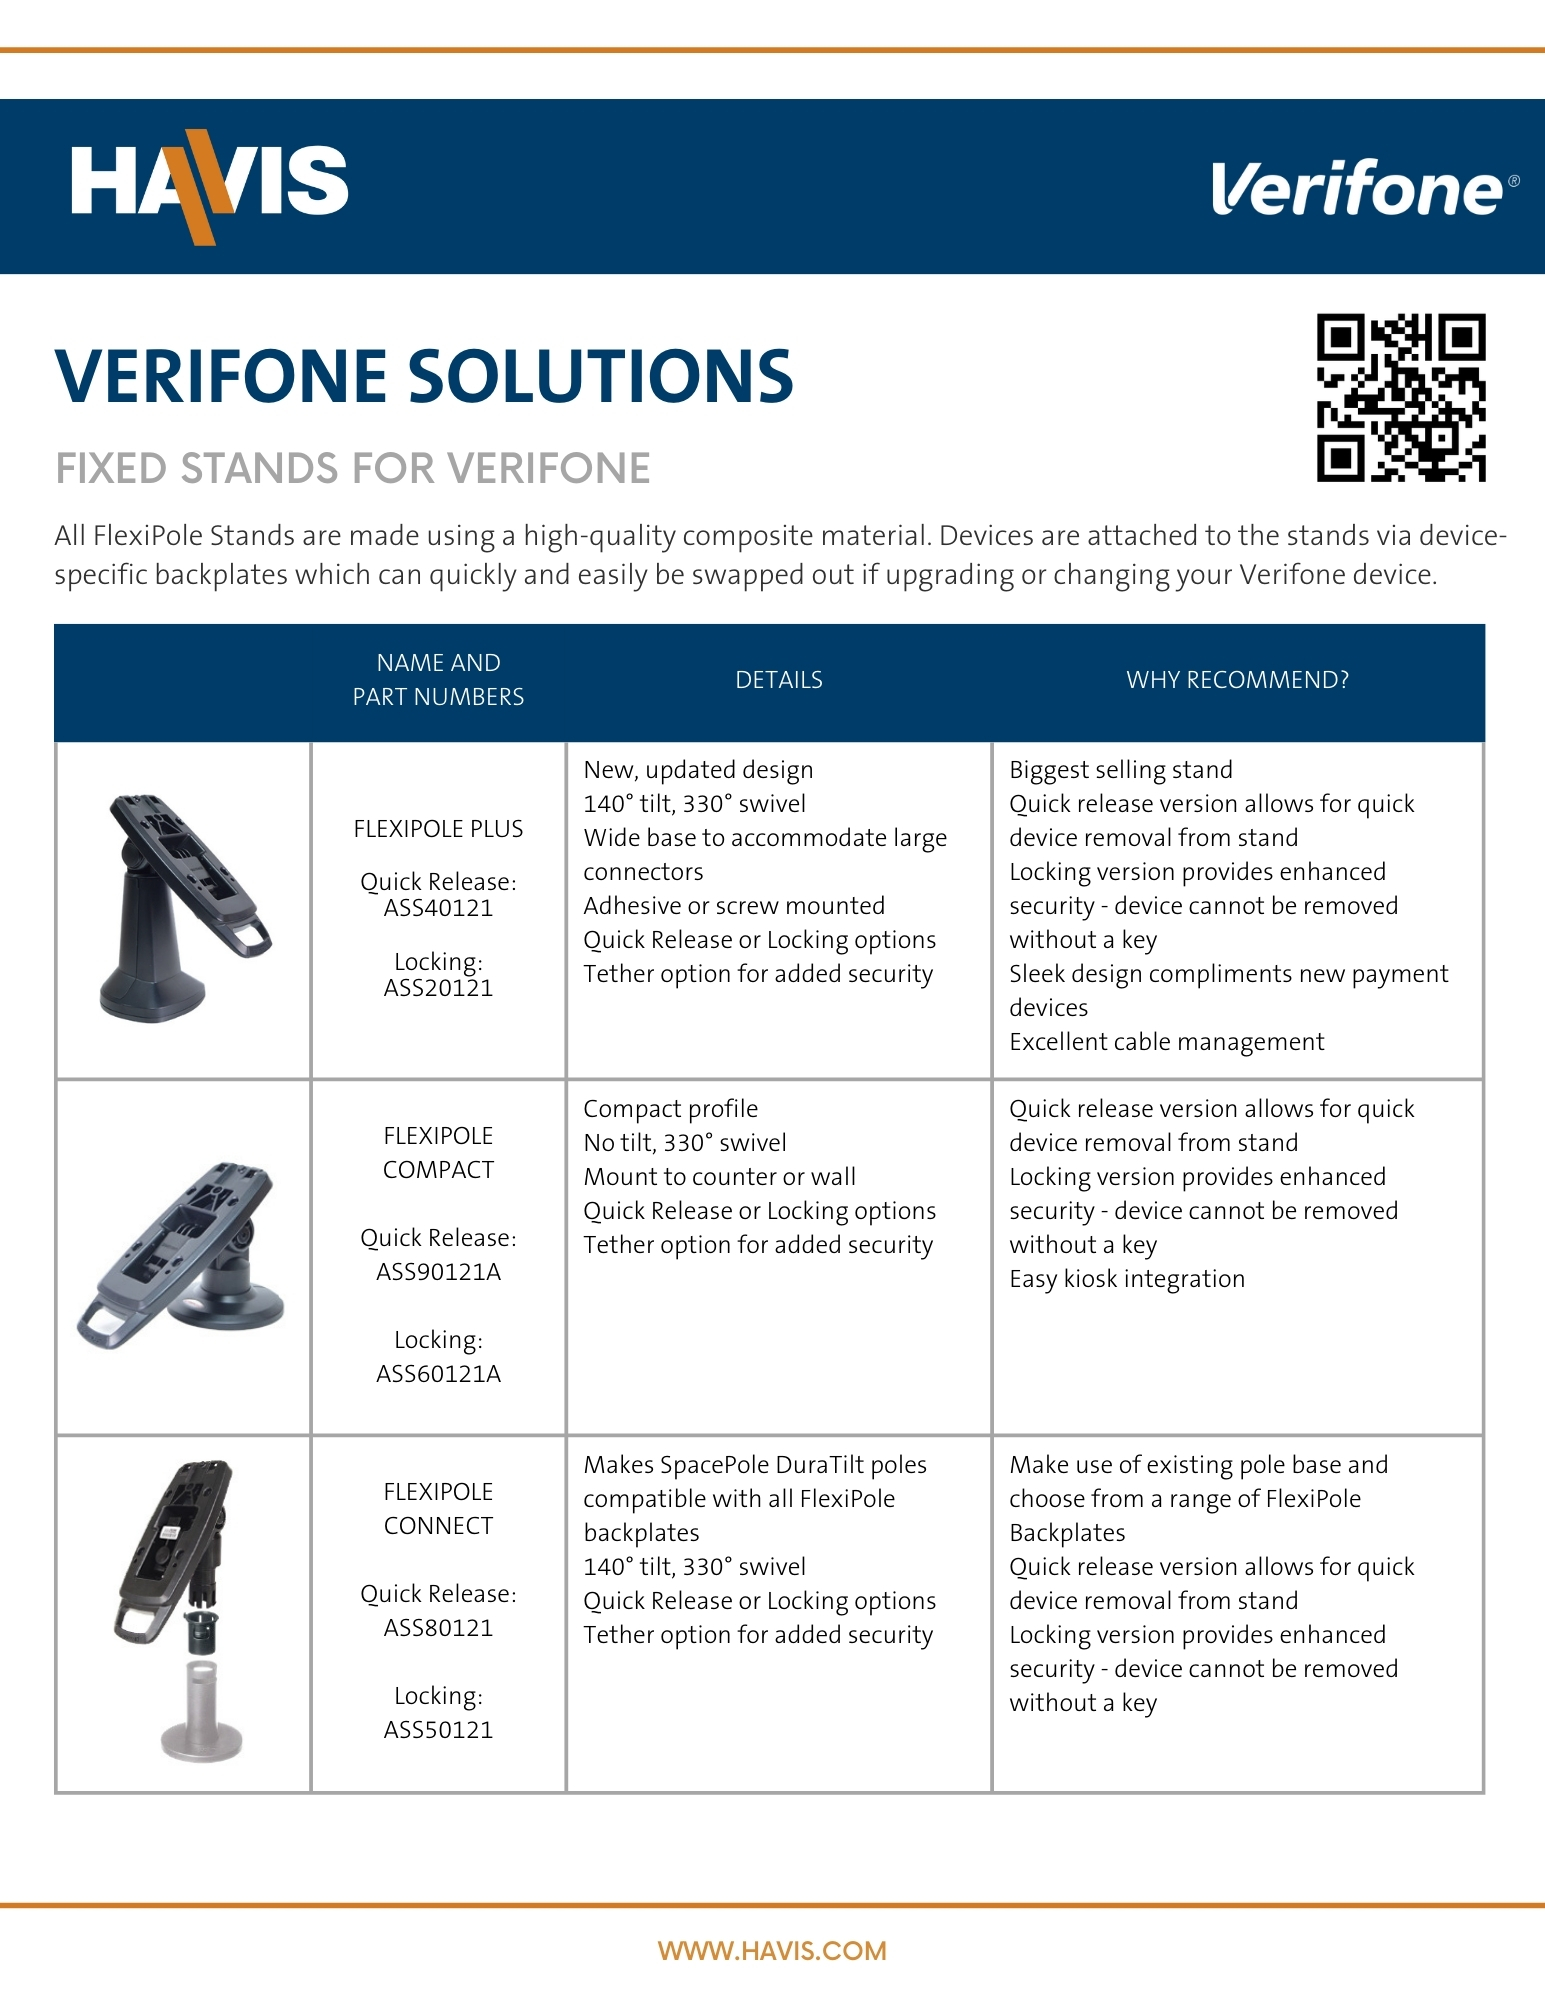 Havis Solutions for Verifone (Quick Reference Guide)